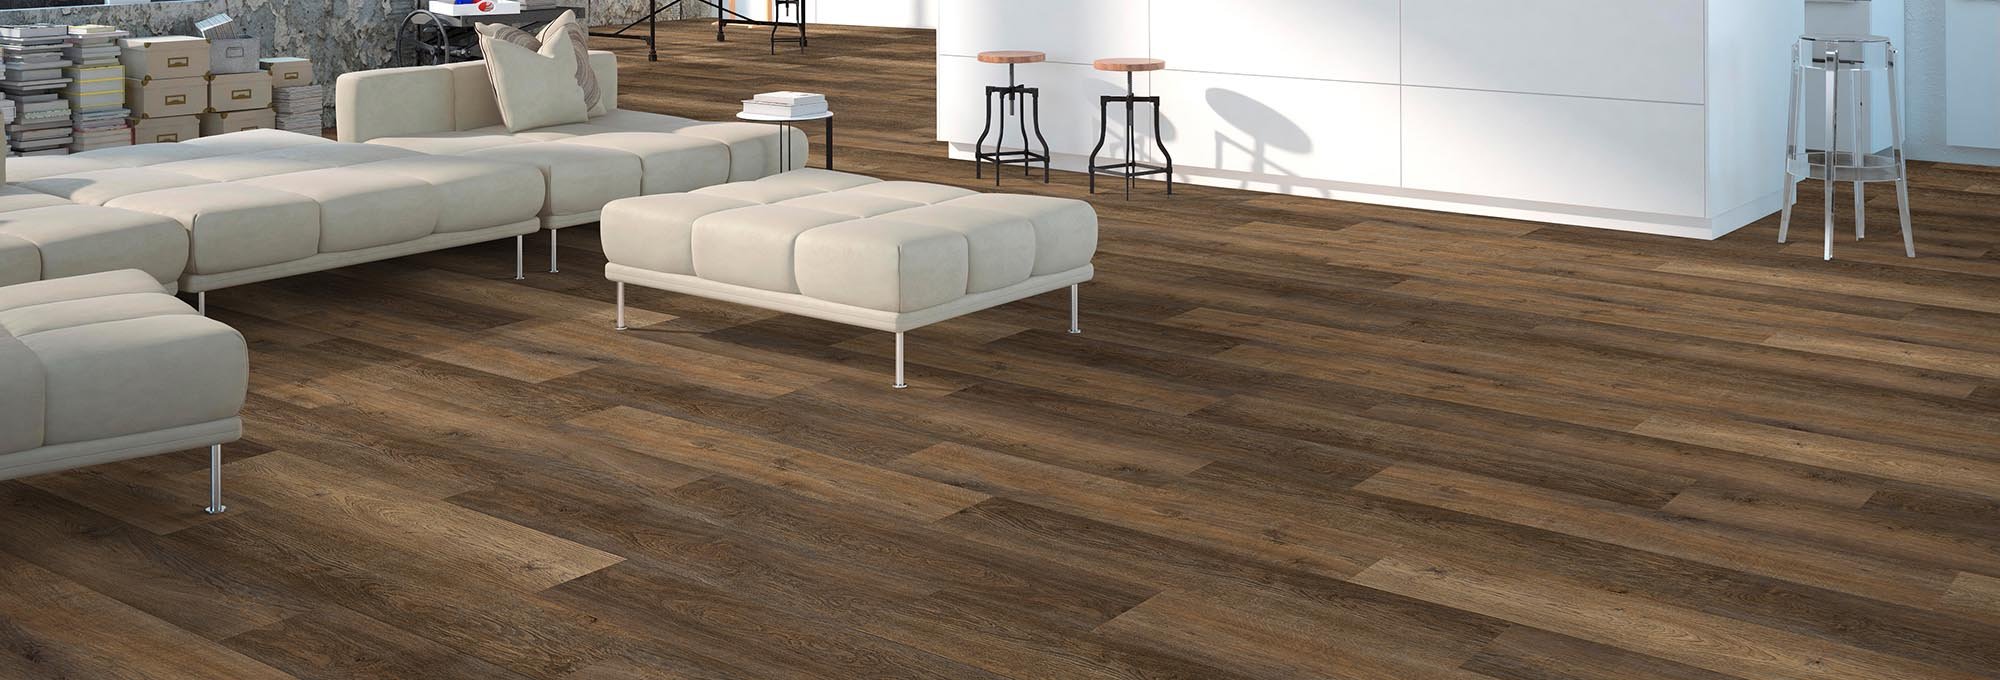 Shop Flooring Products from Color Tile & Carpet | Springfield, MO